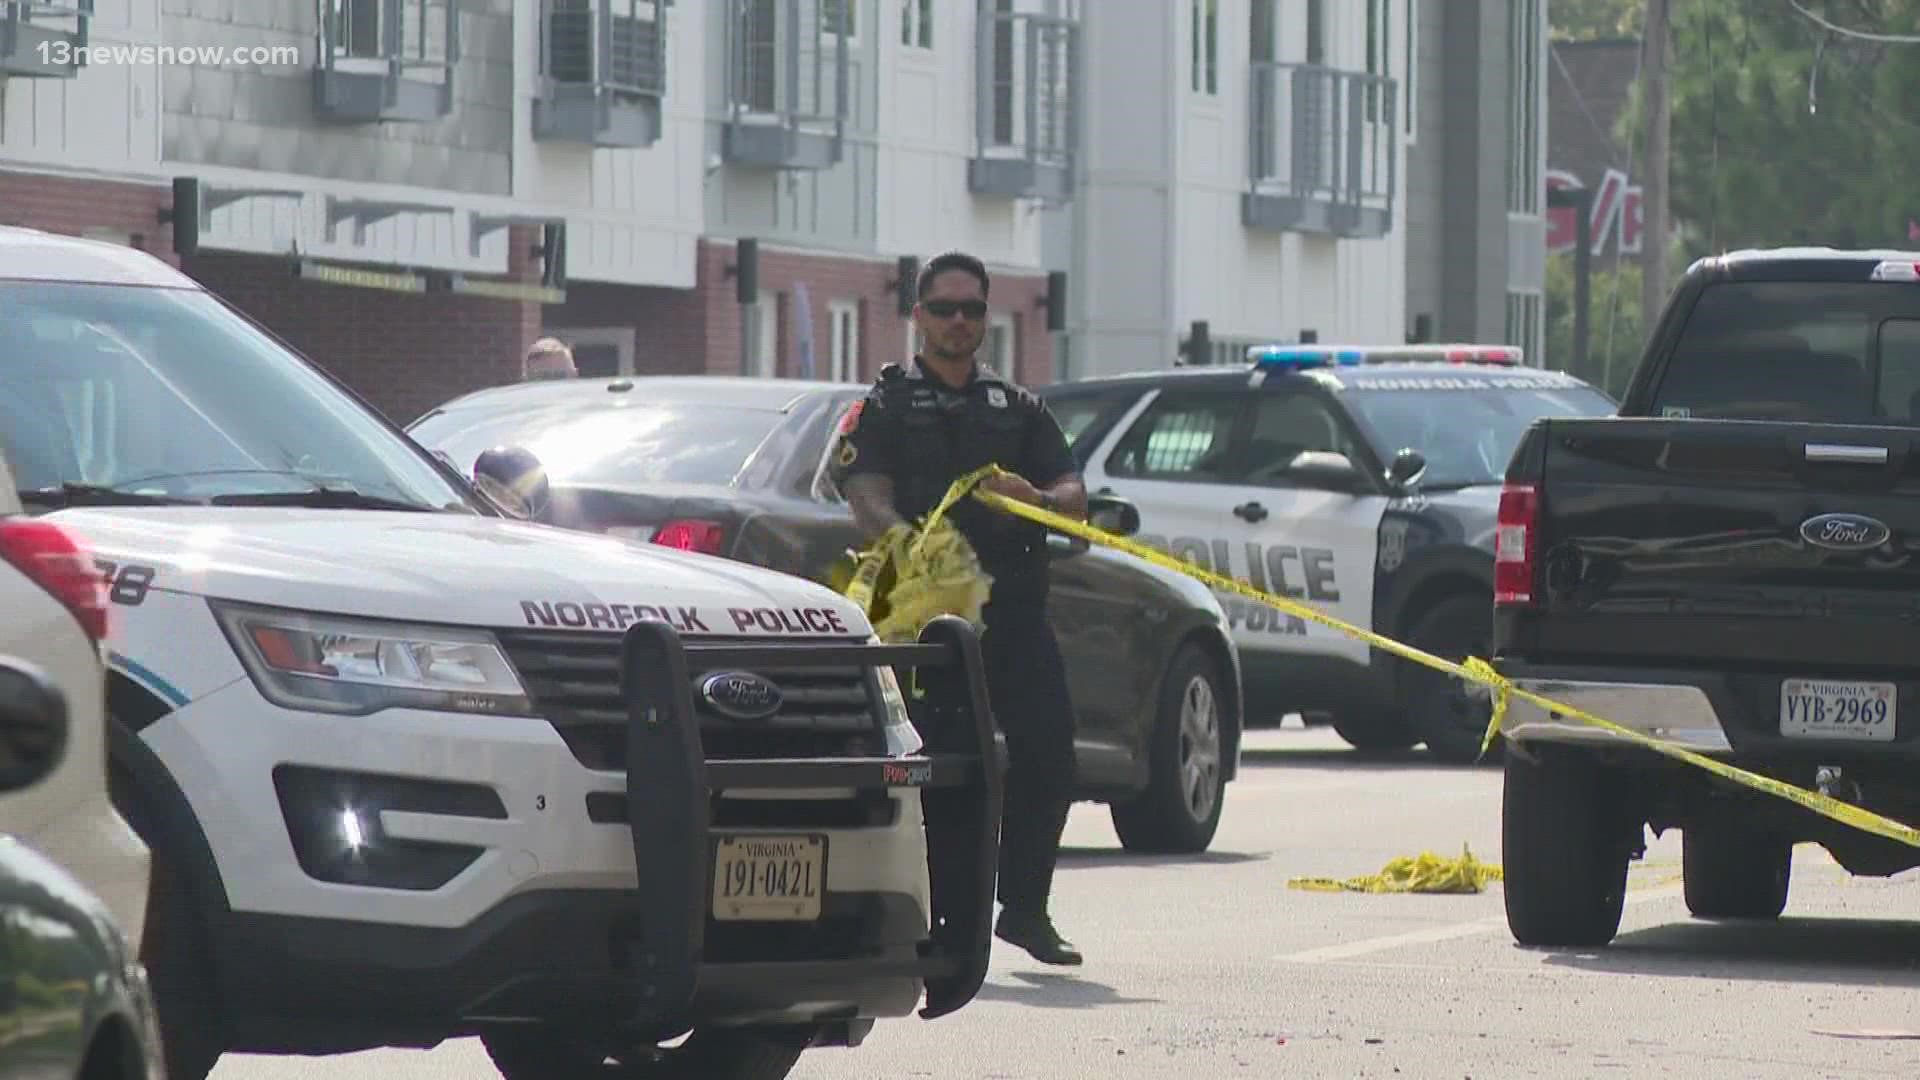 One man has non life-threatening injuries following a shooting near the ODU campus.